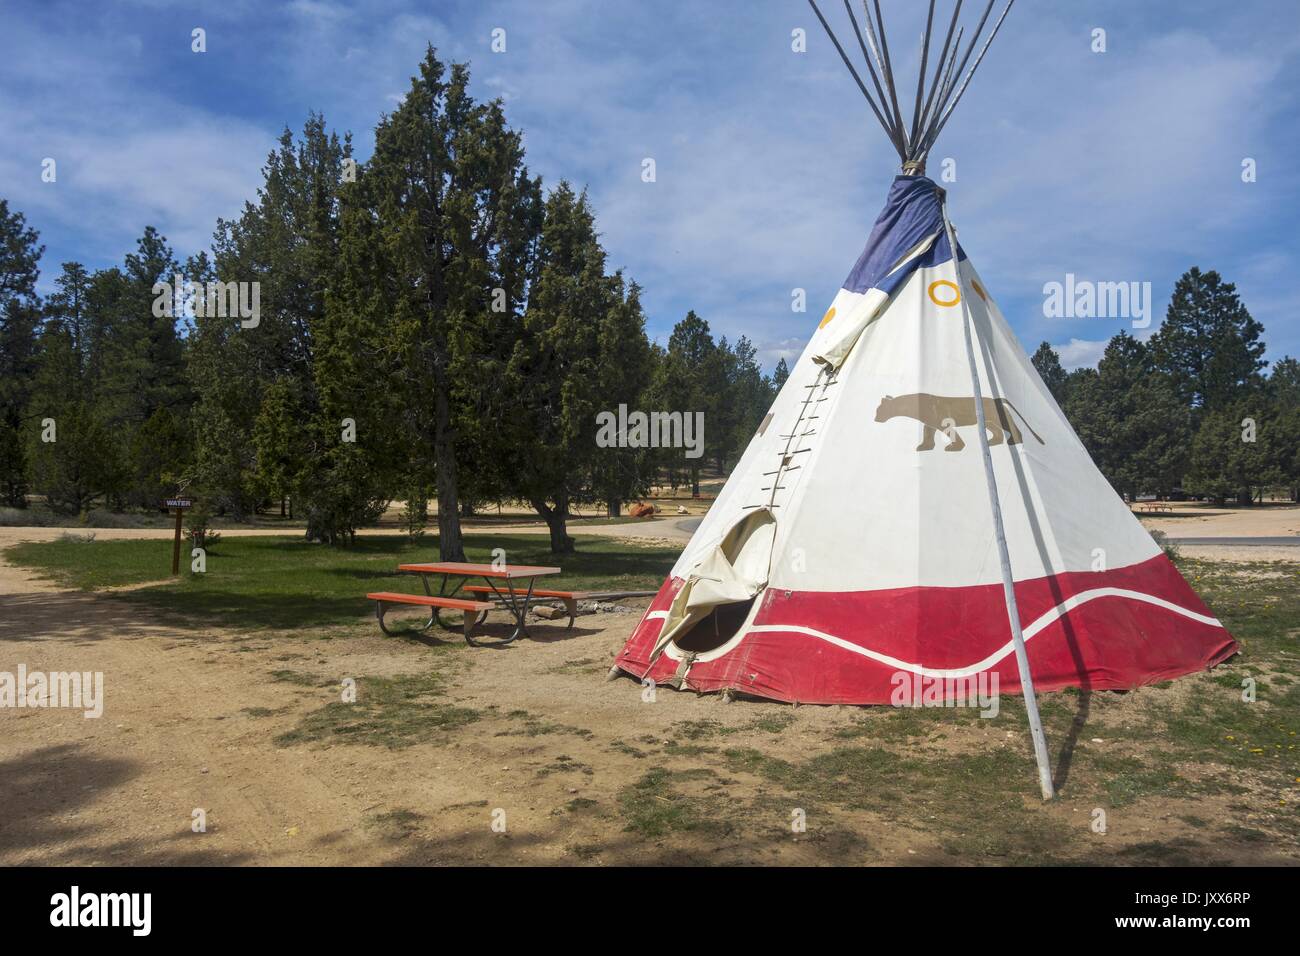 Native Indian Teepee Camping Tent in Ruby’s Inn Campground at Bryce Canyon National Park Entrance Gate, Utah United States Stock Photo